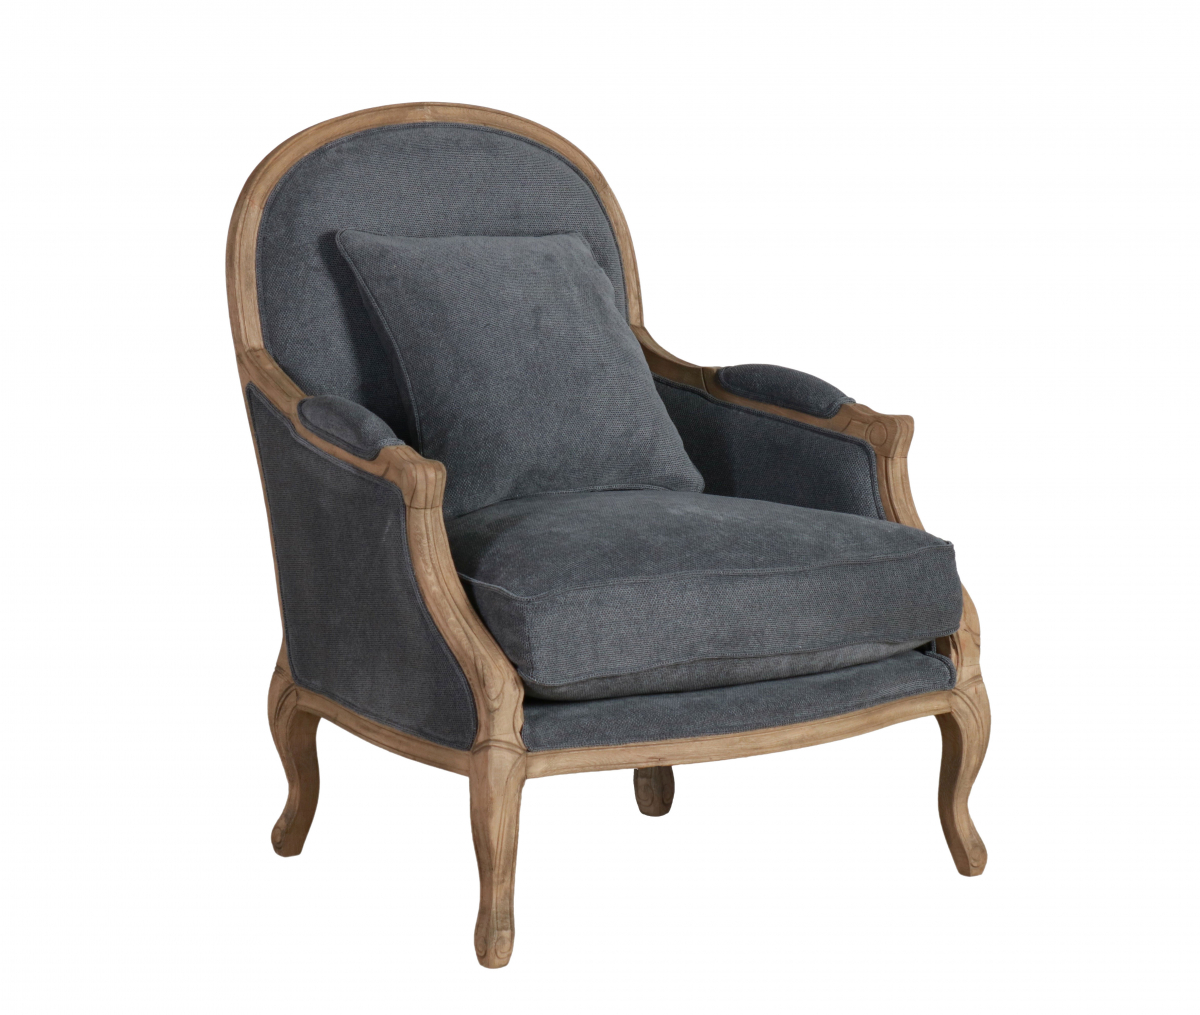 Grey upholstered chair with oak frame